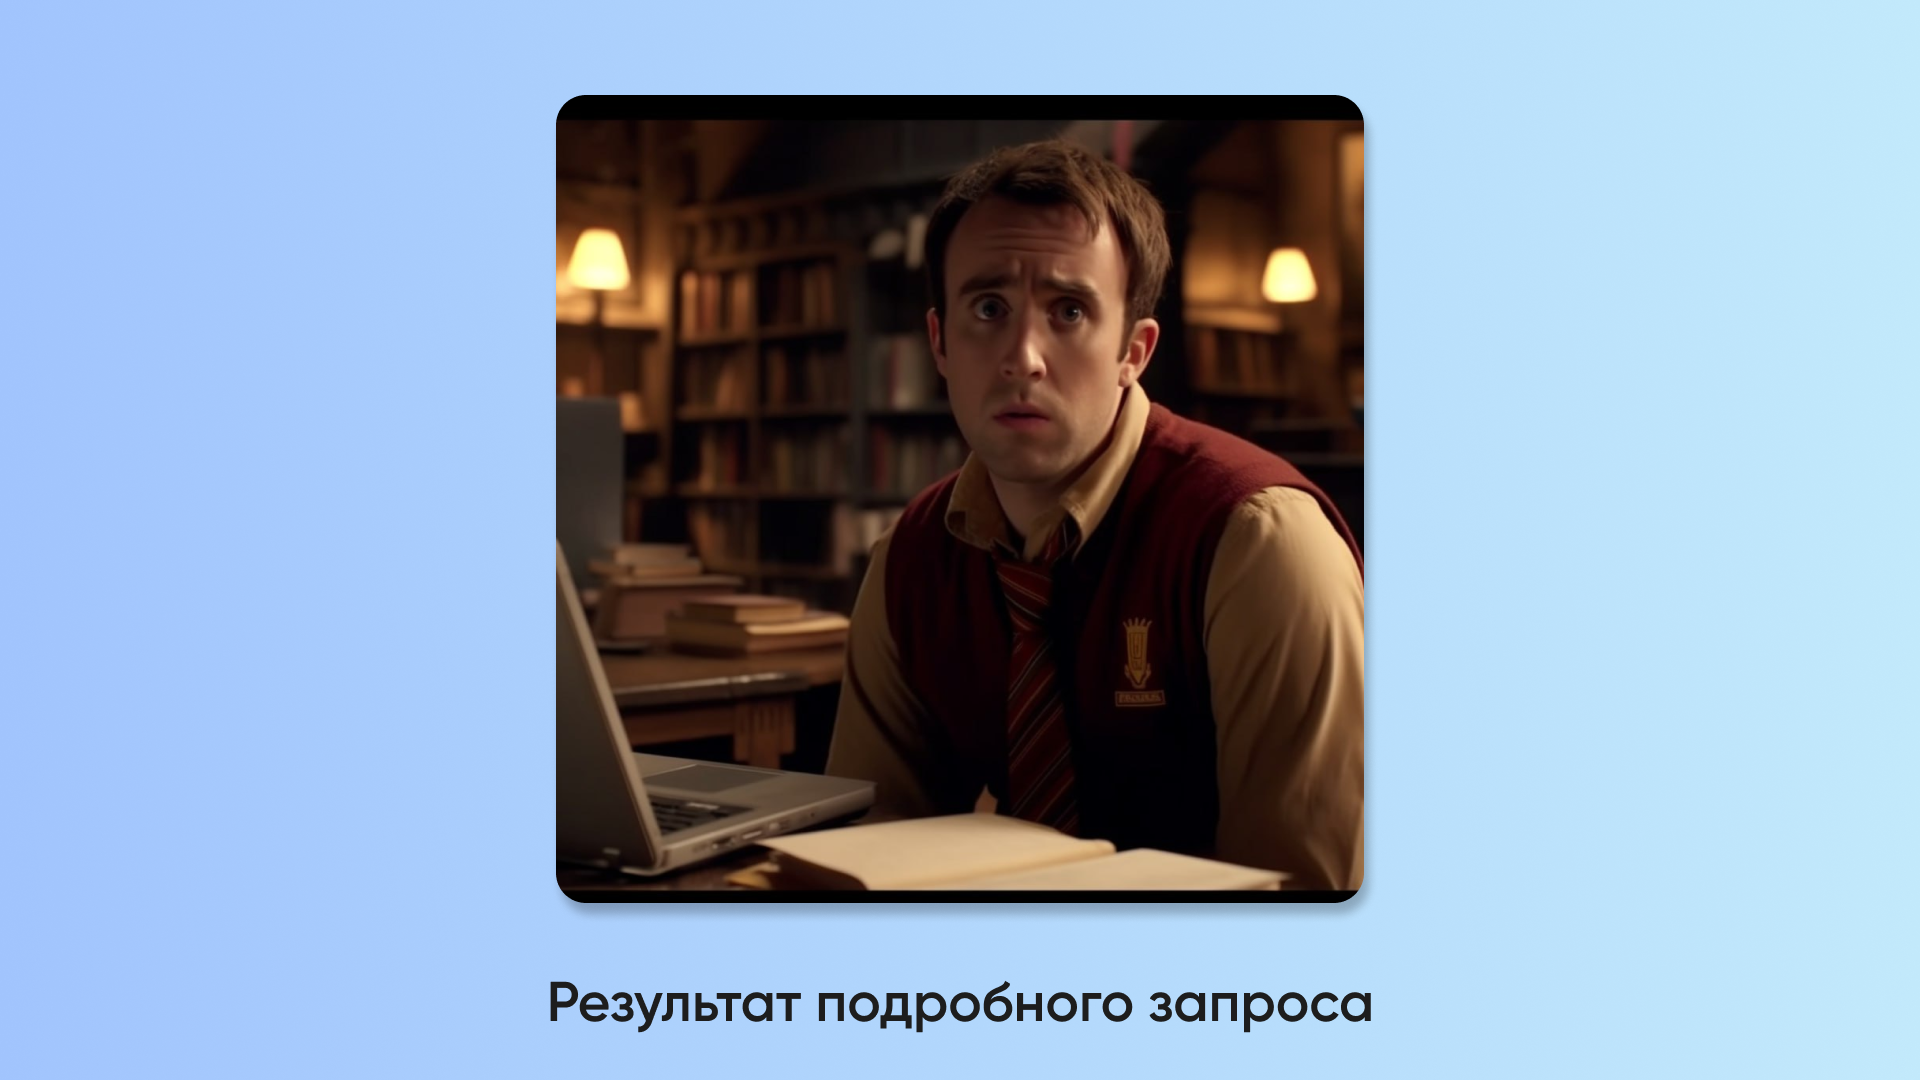 (Hogwarts student Neville Longbottom in Griffindor uniform, sitting in Hogwarts library with book shelf on background, looking at laptop on the table, confused face, realistic lightning) — Невилл Долгопупс здорового человека